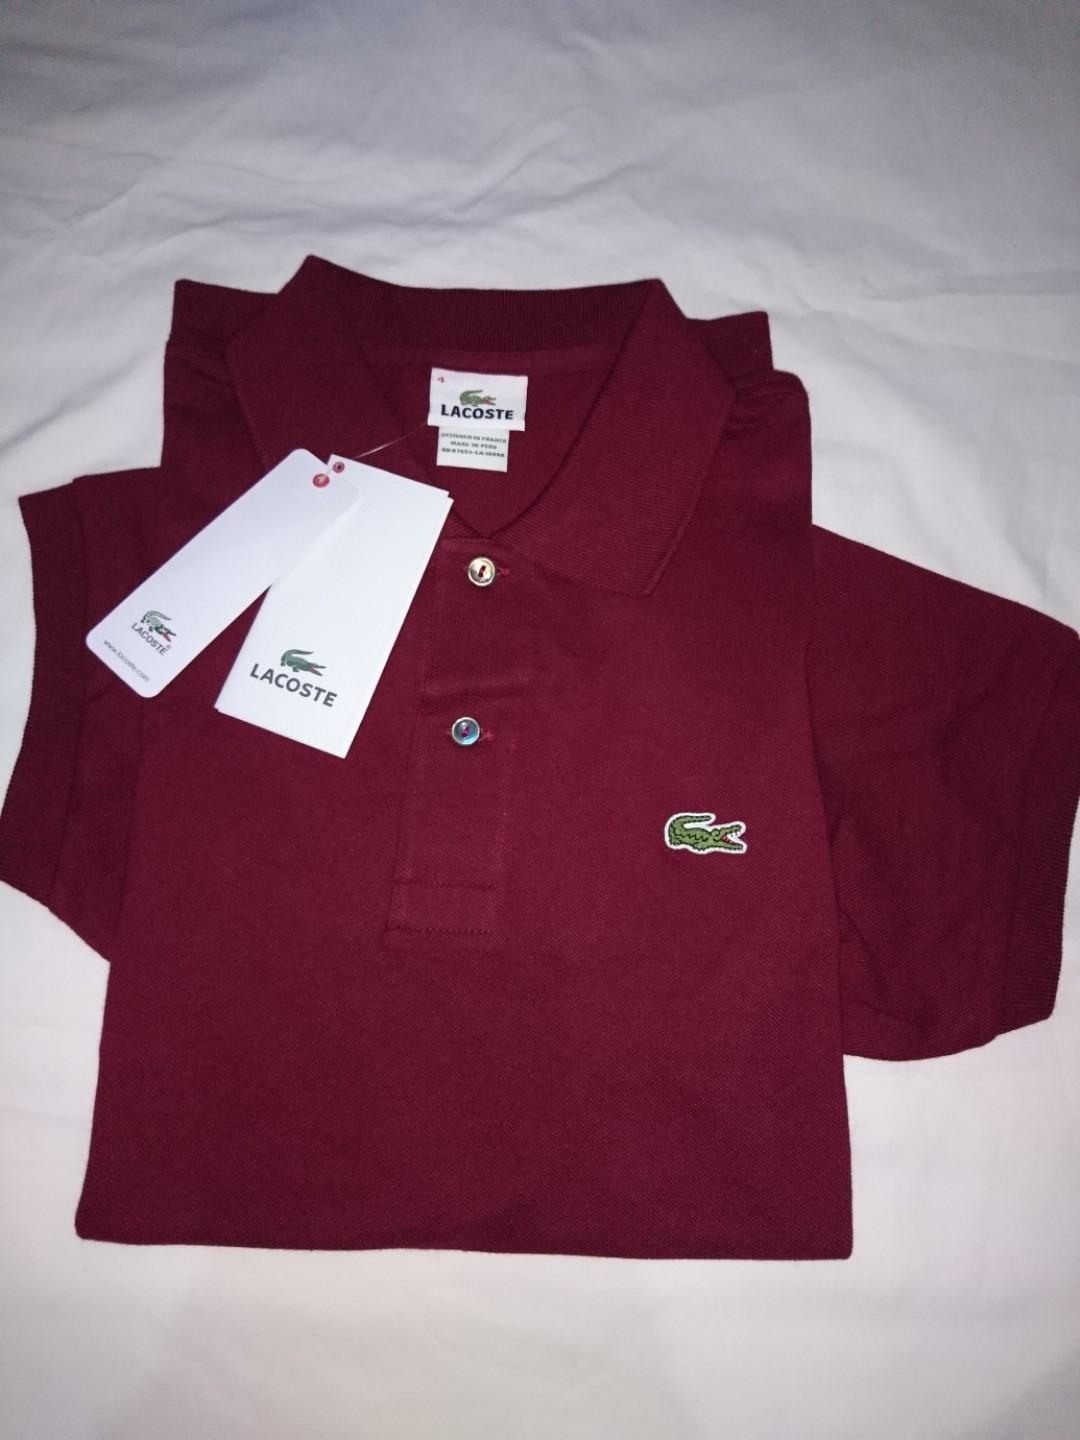 LACOSTE Classic Polo shirt for Men size 